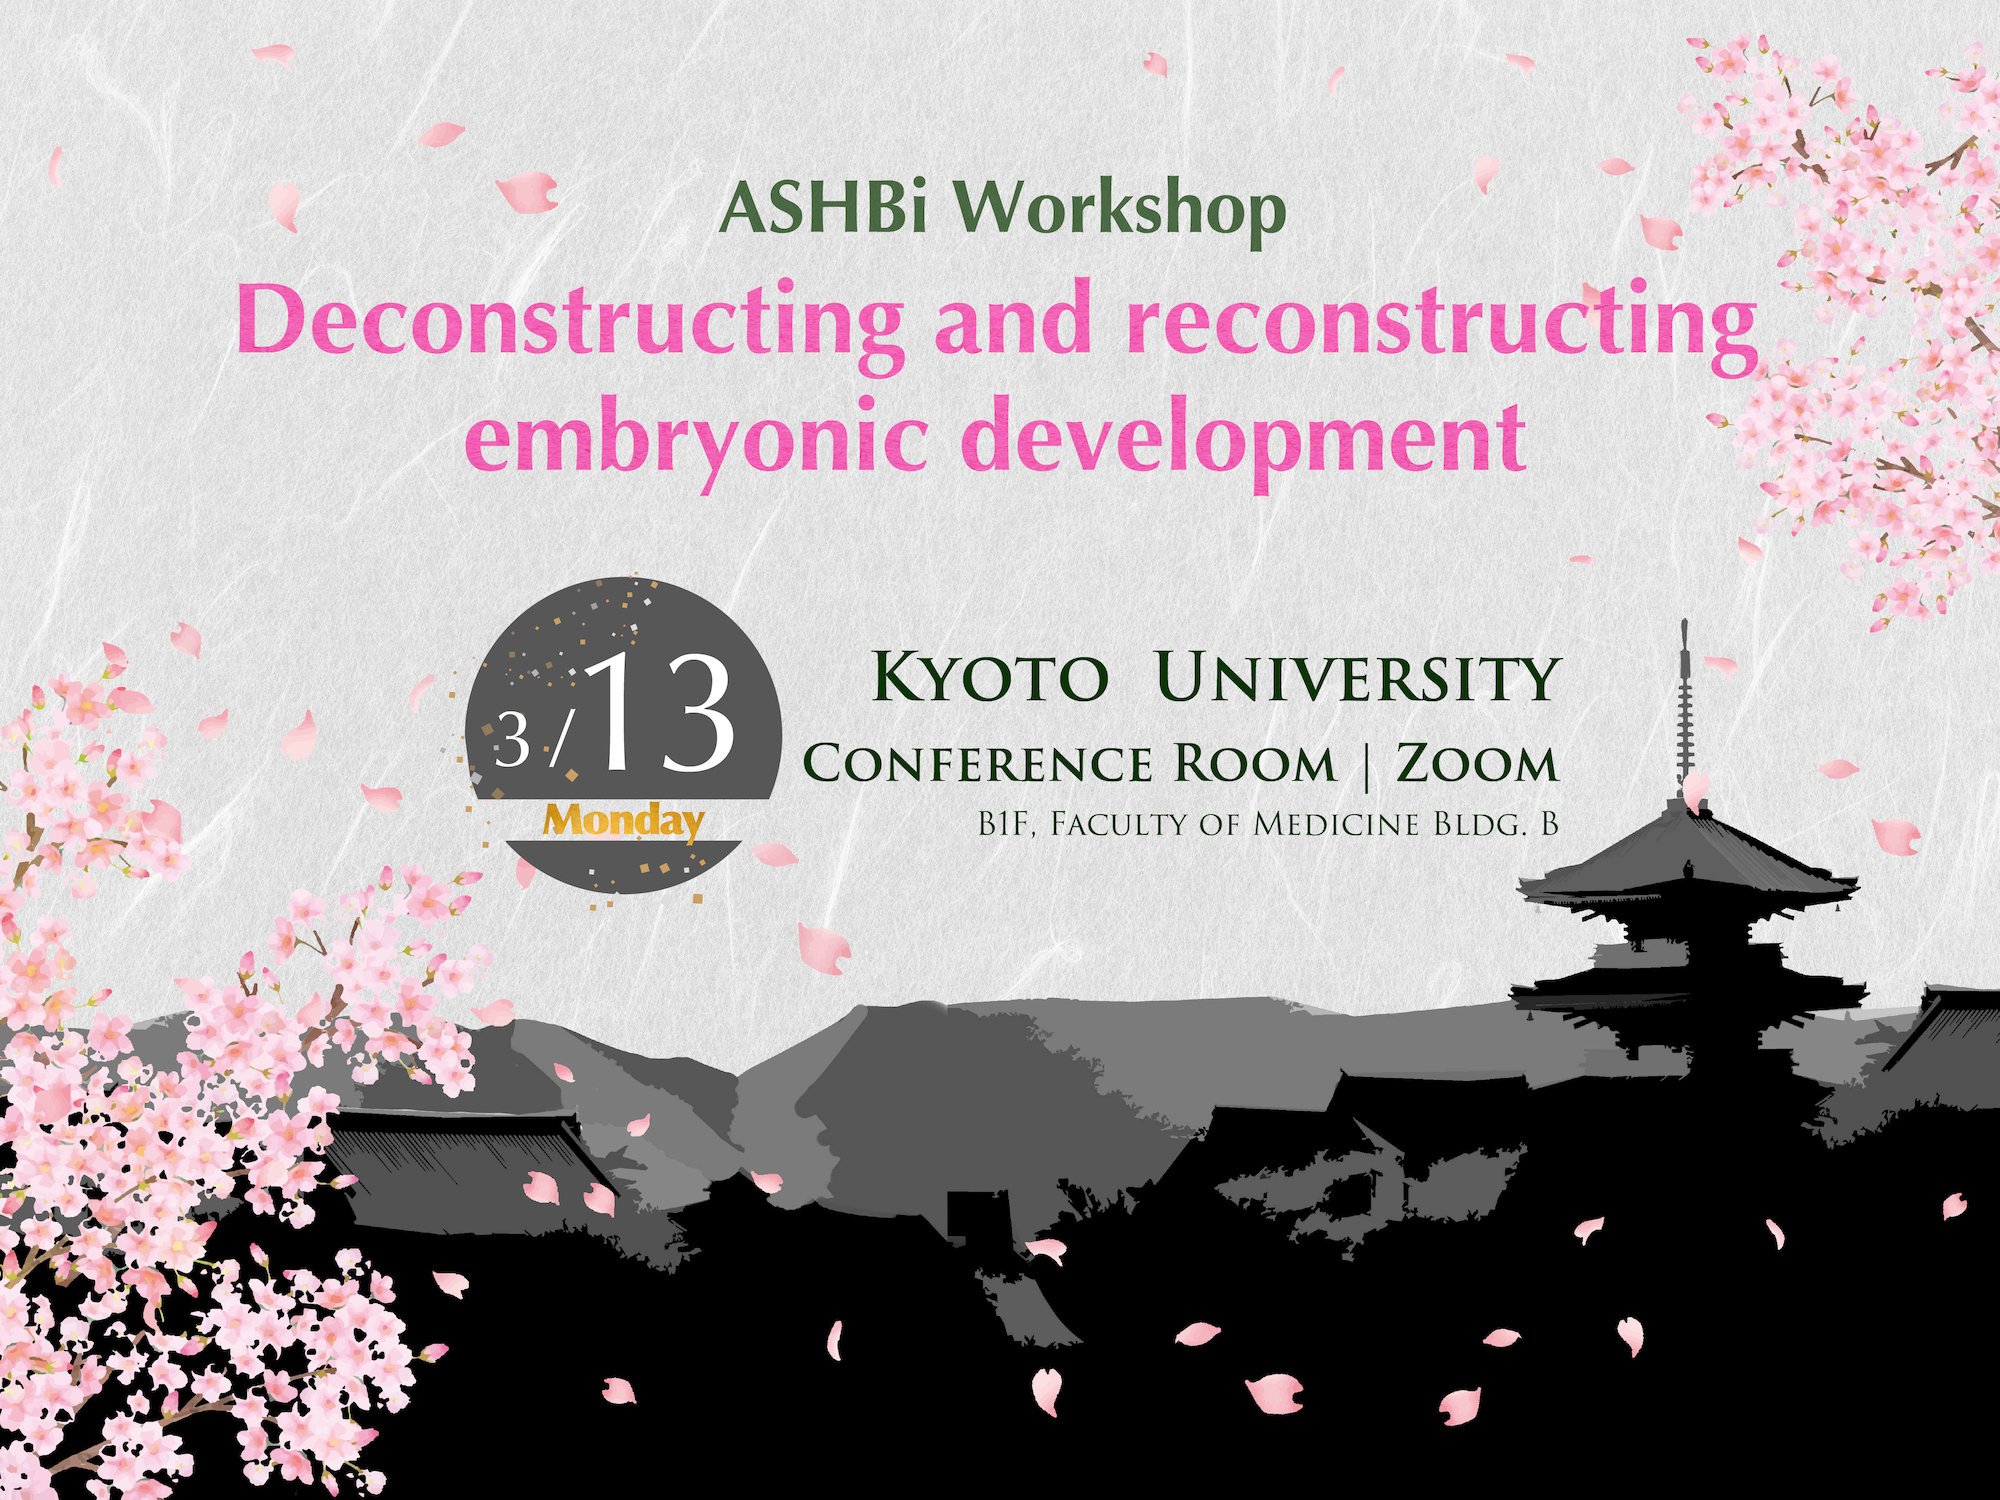 Deconstructing and reconstructing embryonic development